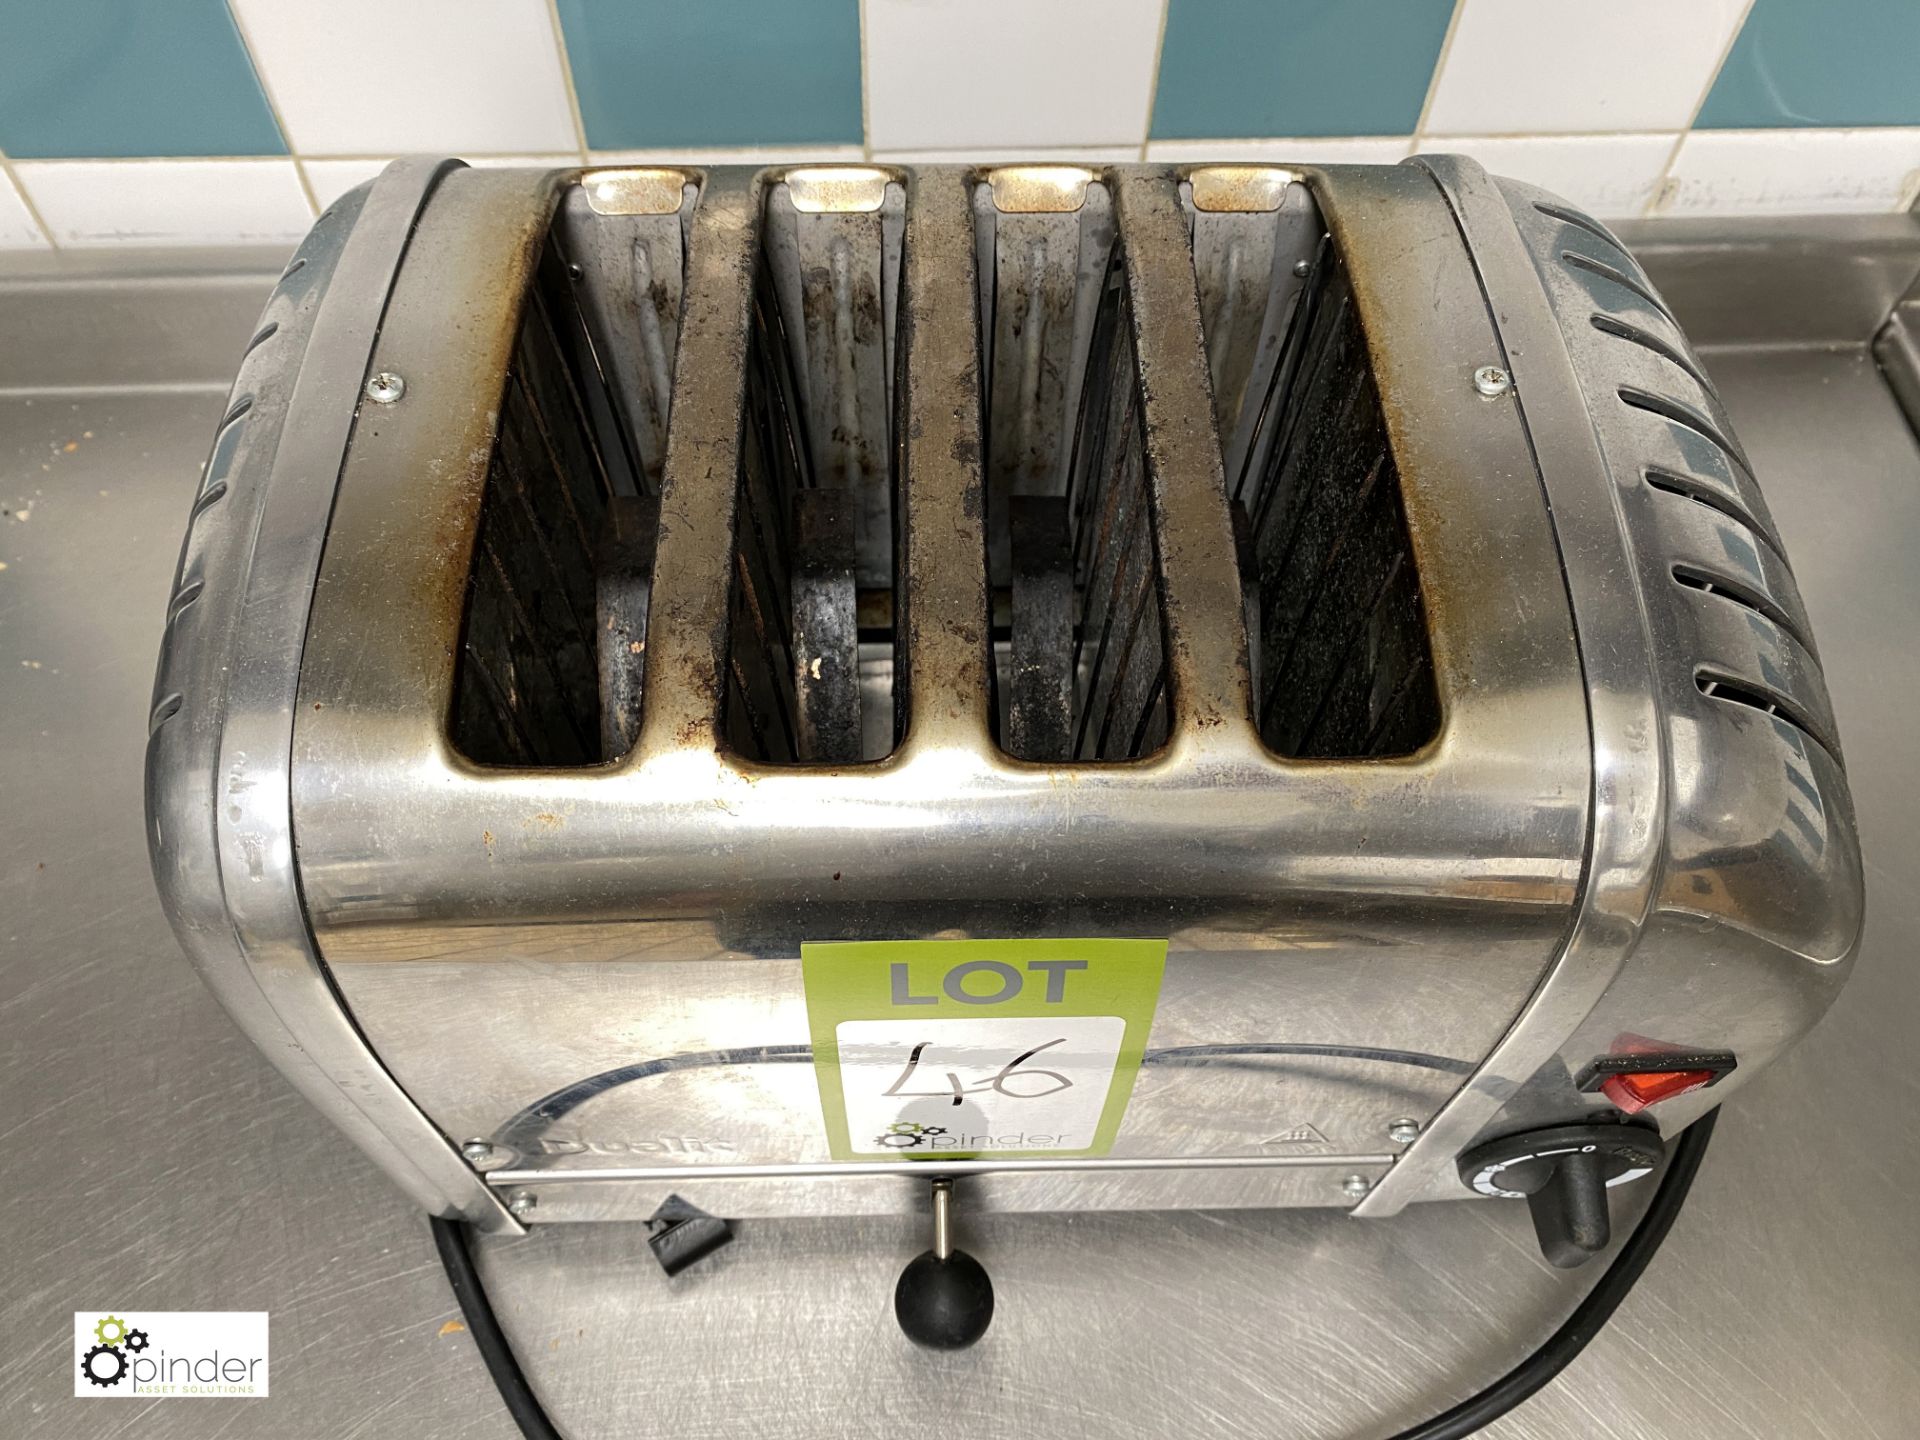 Dualit 4-slot Toaster, 240volts - Image 2 of 2